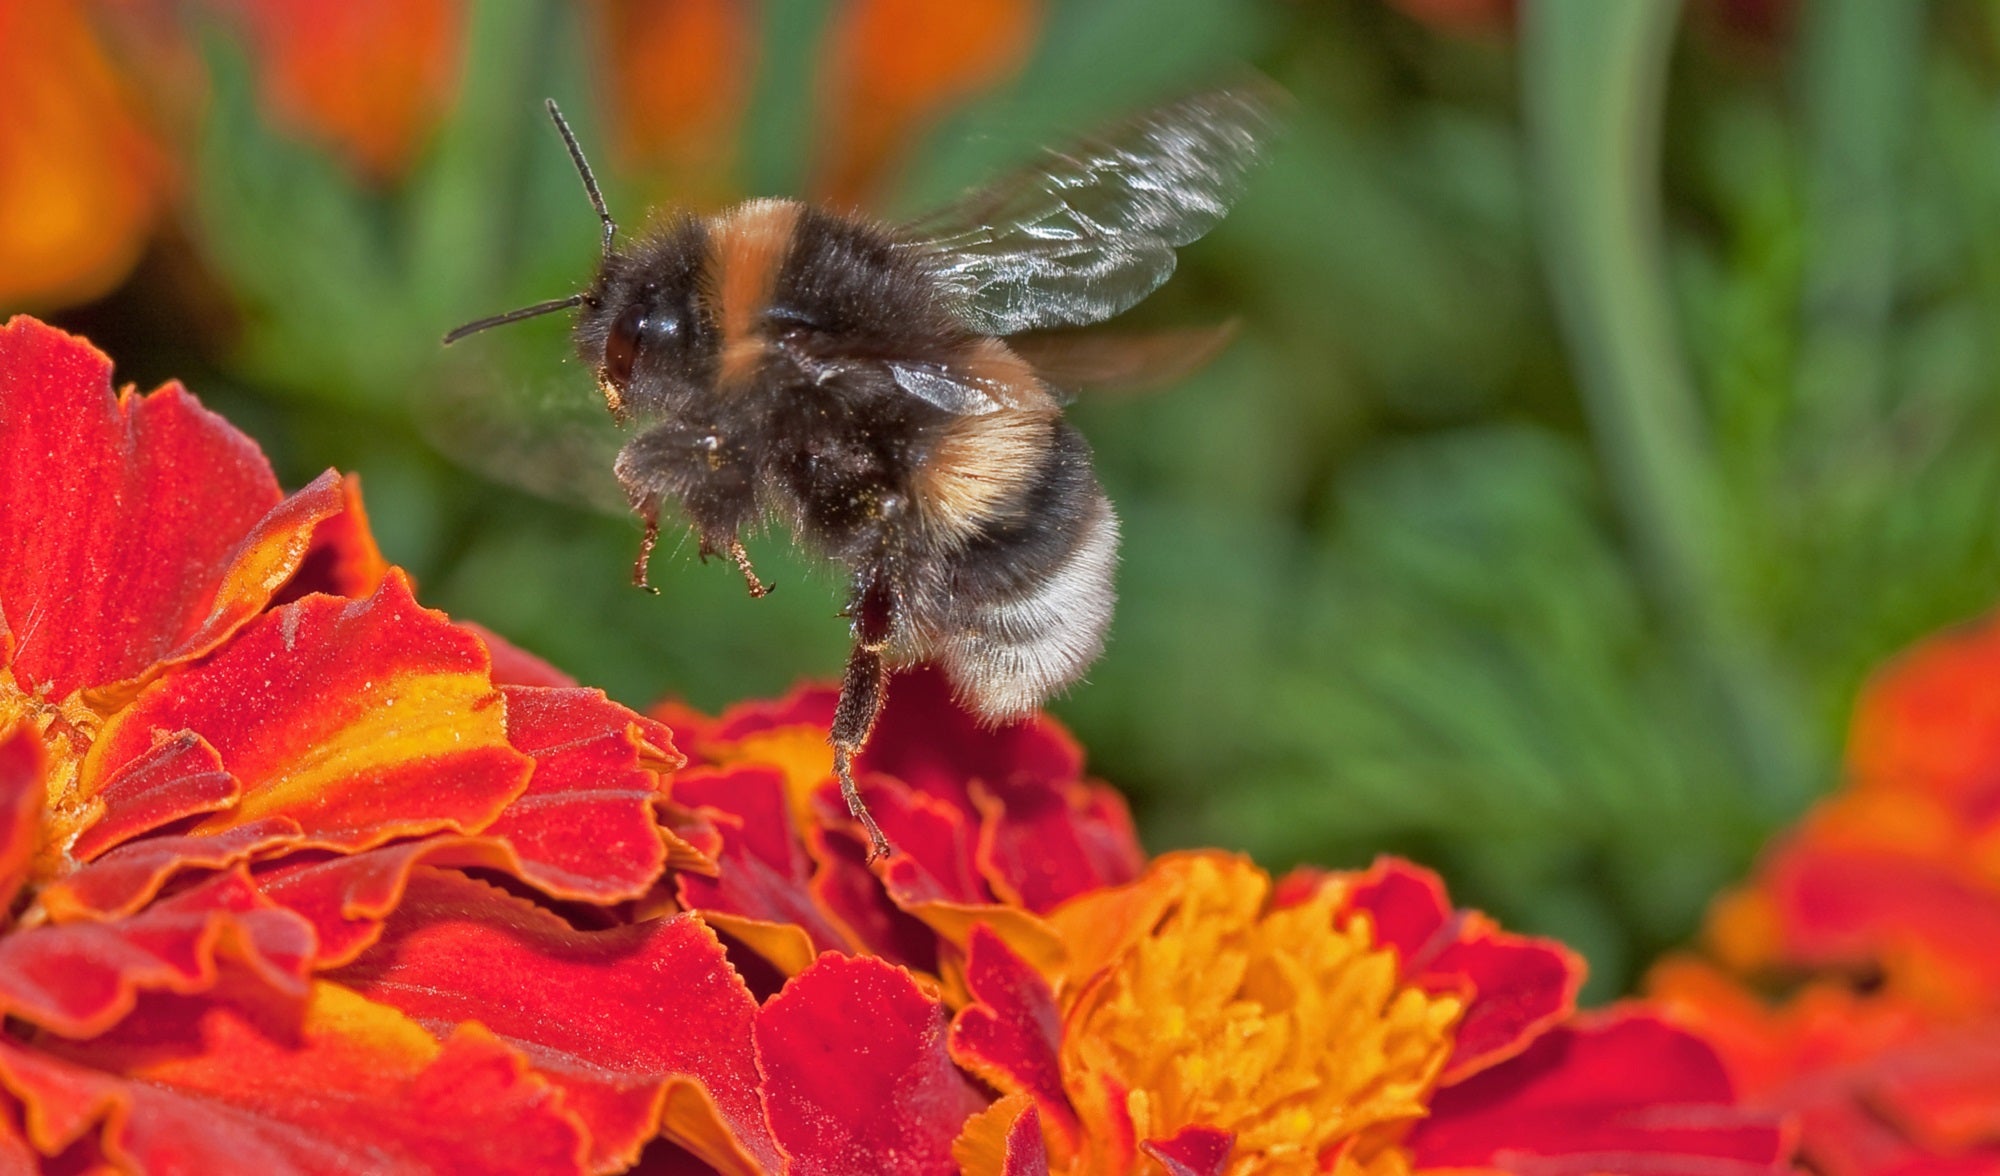 Bees are the ultimate EVs—for worms